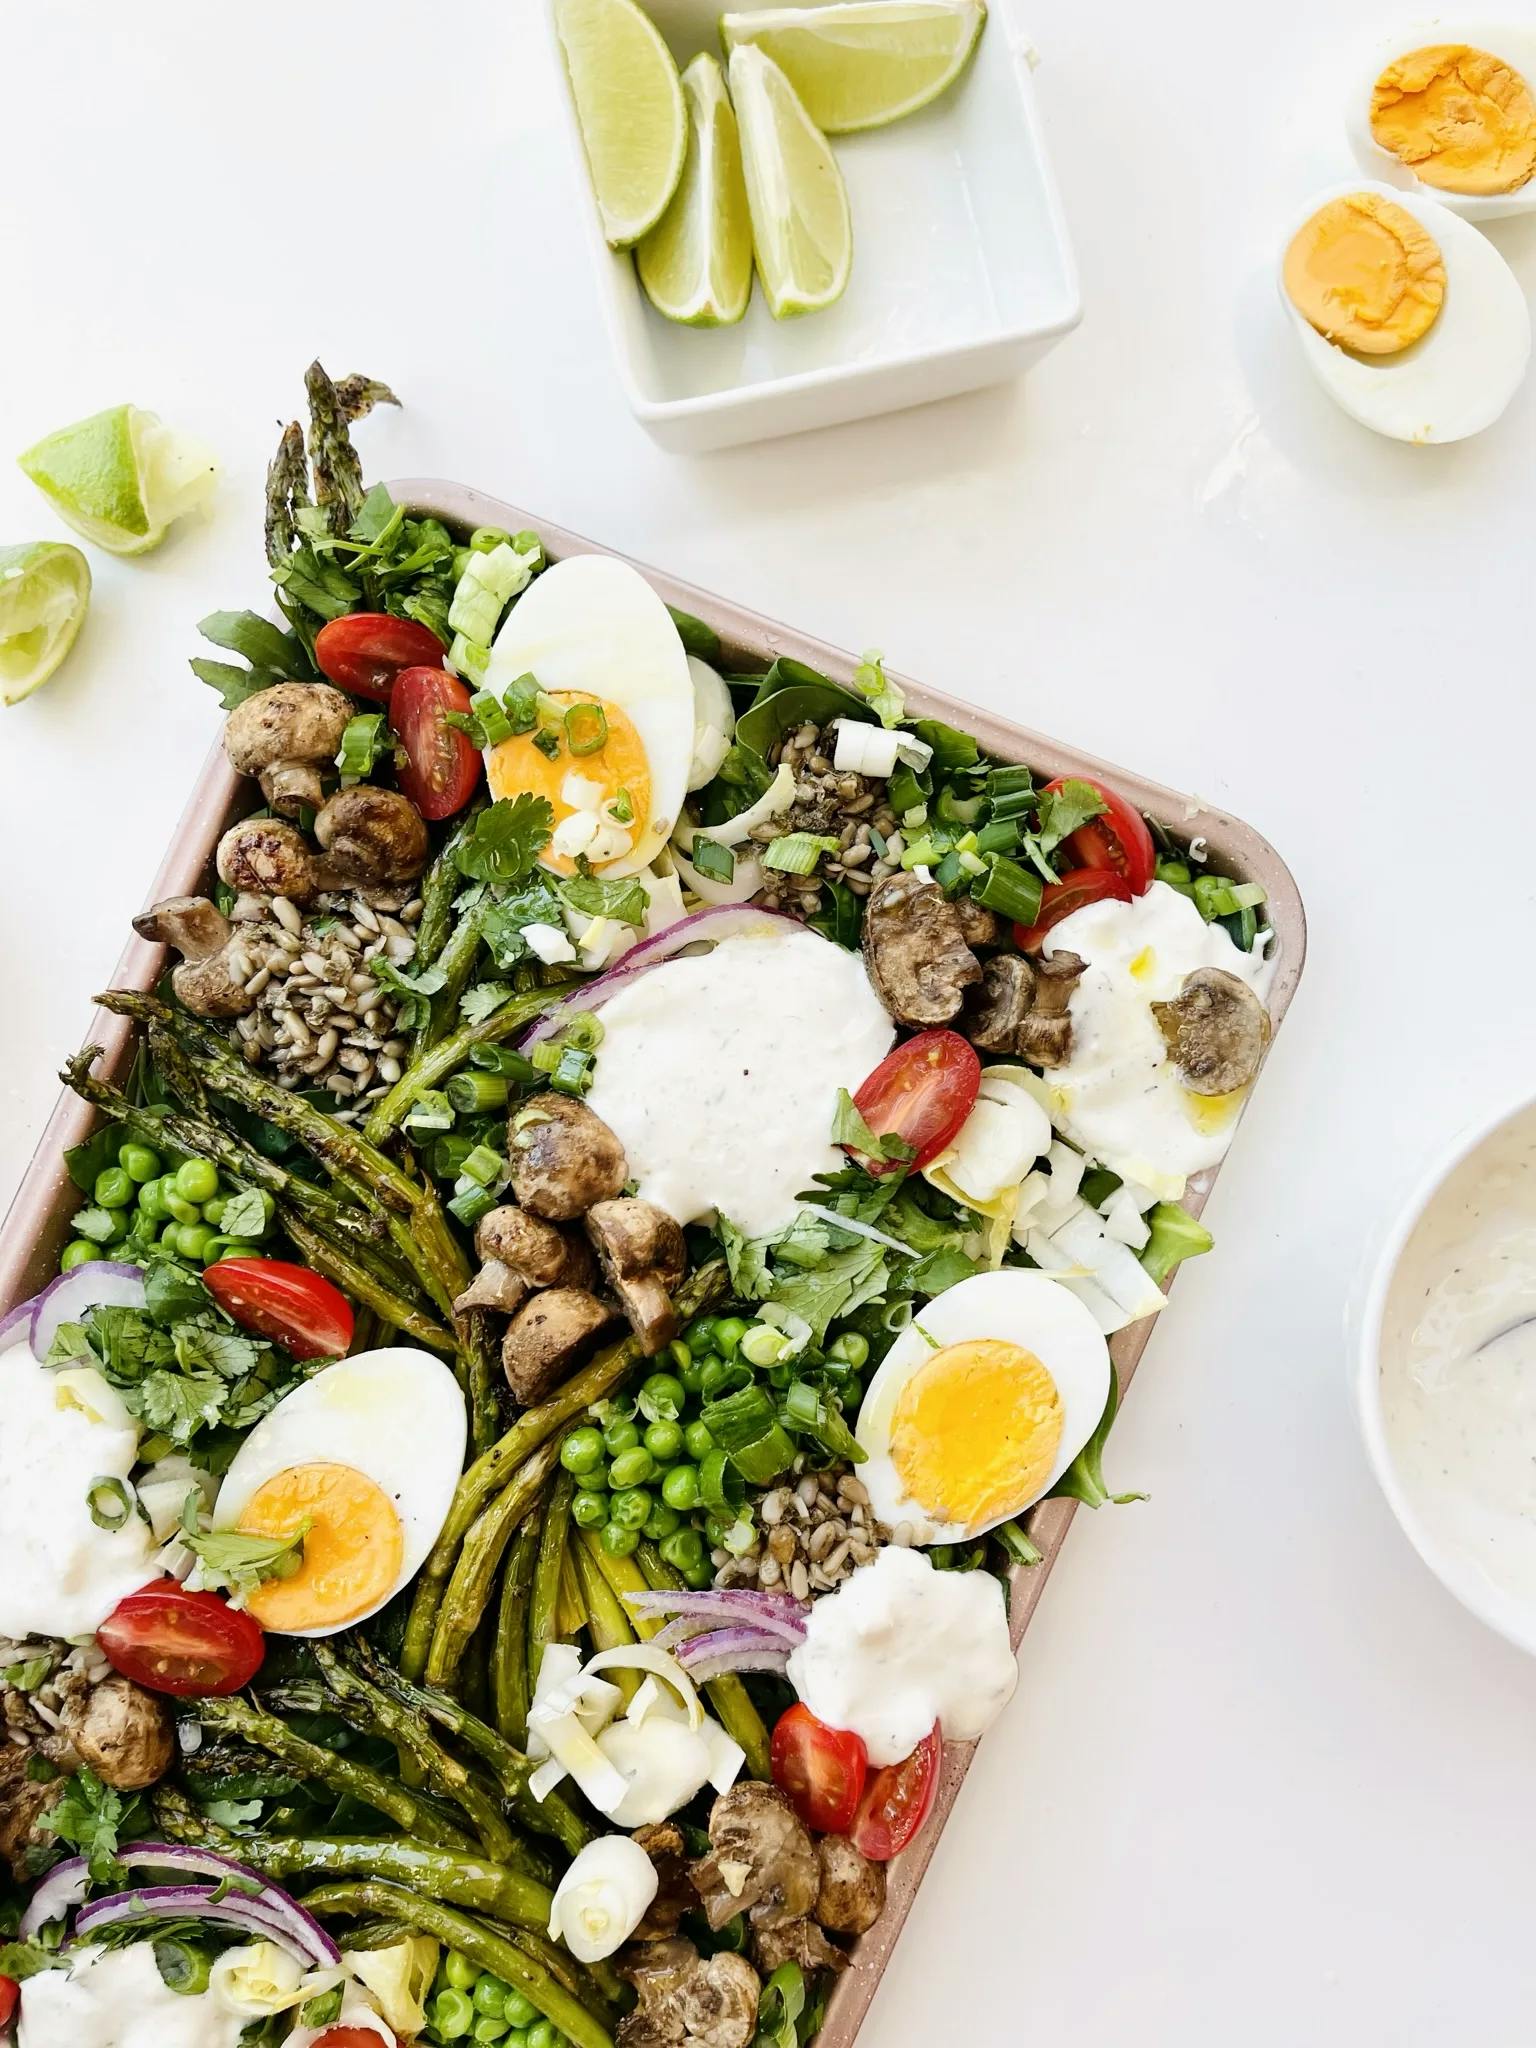 Picture for Toby's Sheet Pan Cobb Salad